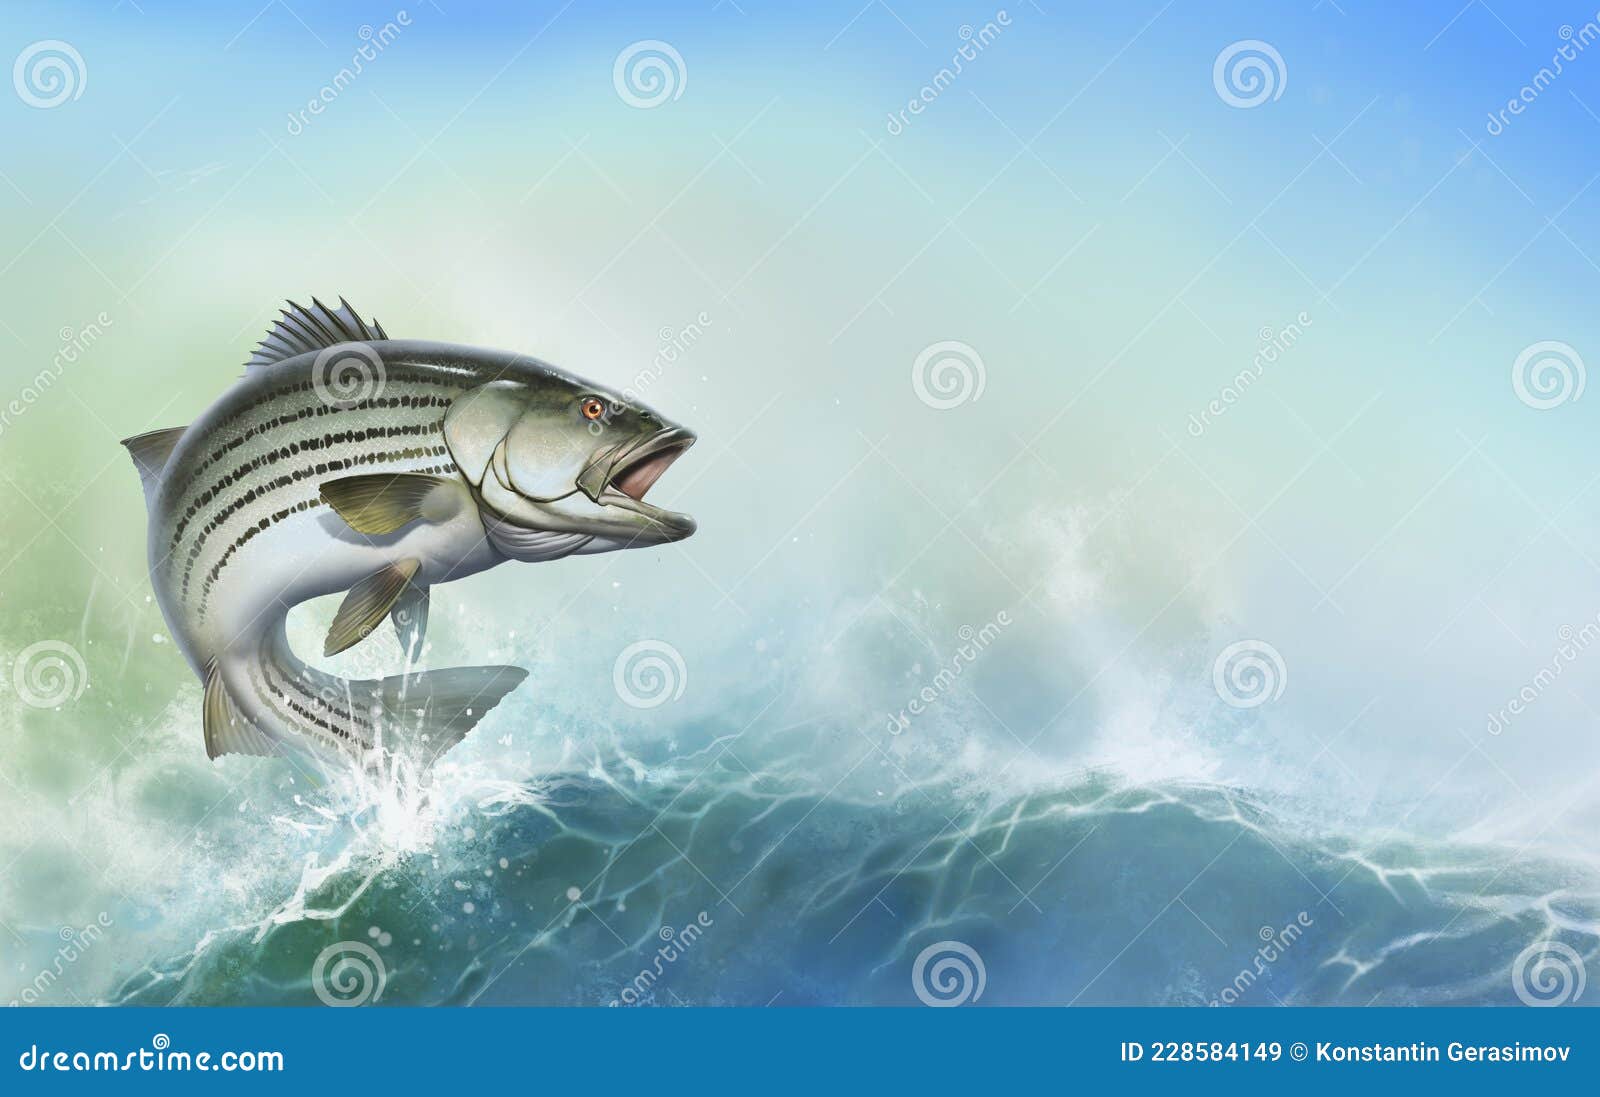 striped bass jumping out of the water  isolate realism. striped perch on the background of splashing water.